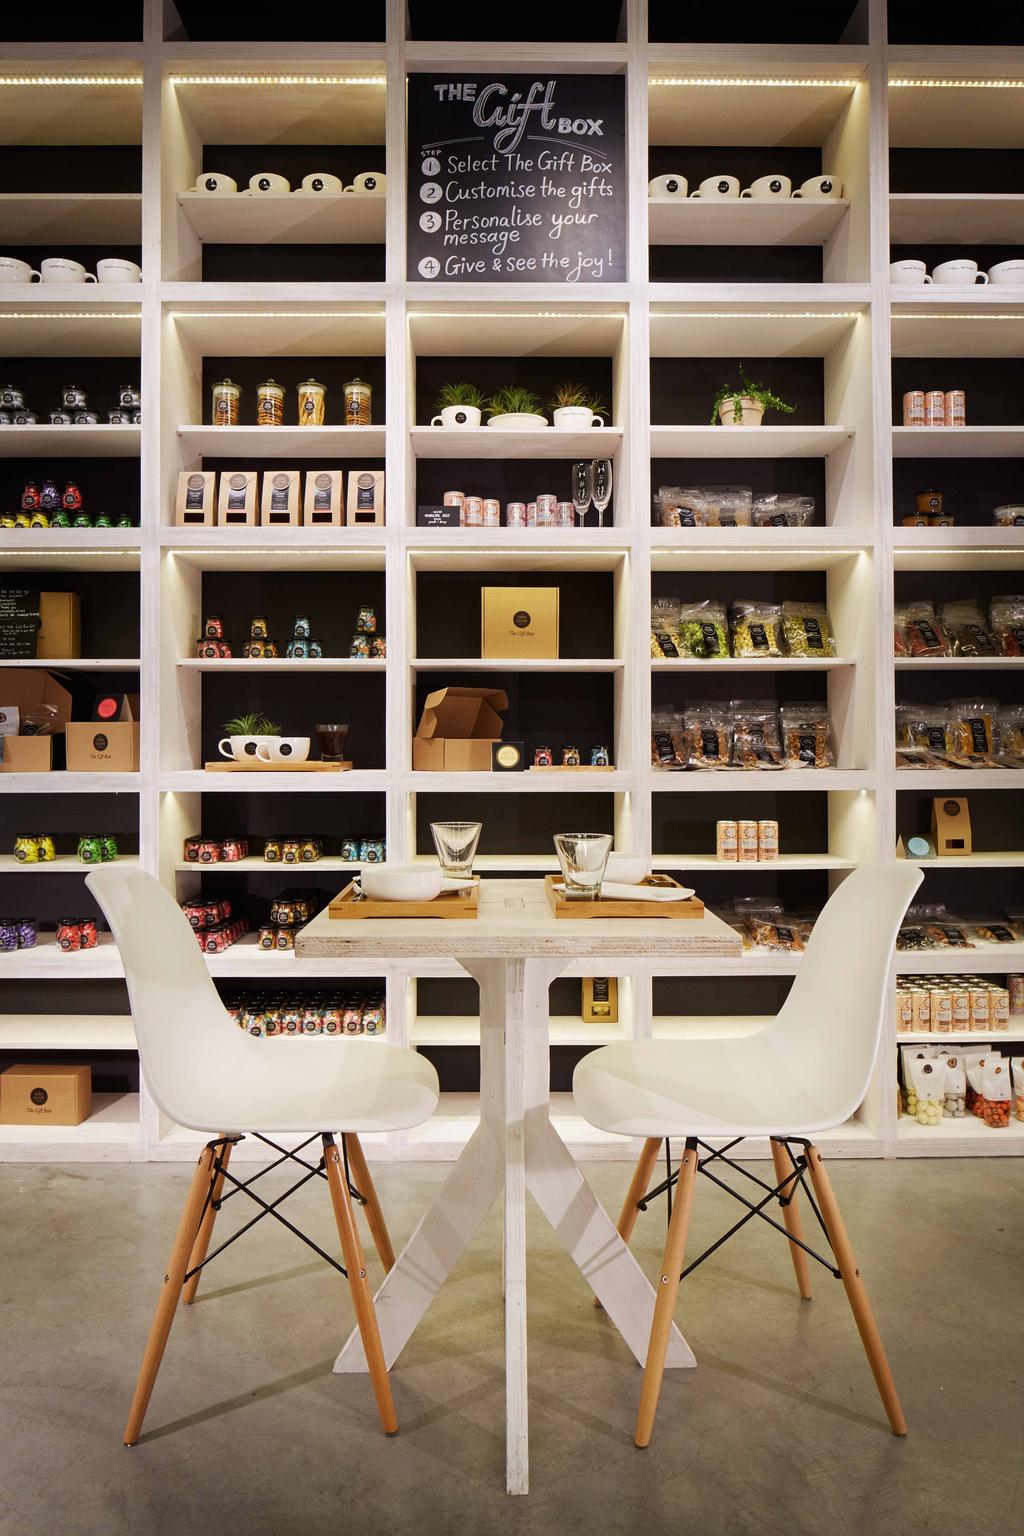 Snack Culture, Commercial, Architect, asolidplan, Modern, Minimalist, Simple Dining, Tall White Shelving, Tall White Shelves, Couple Dining Table, Shop